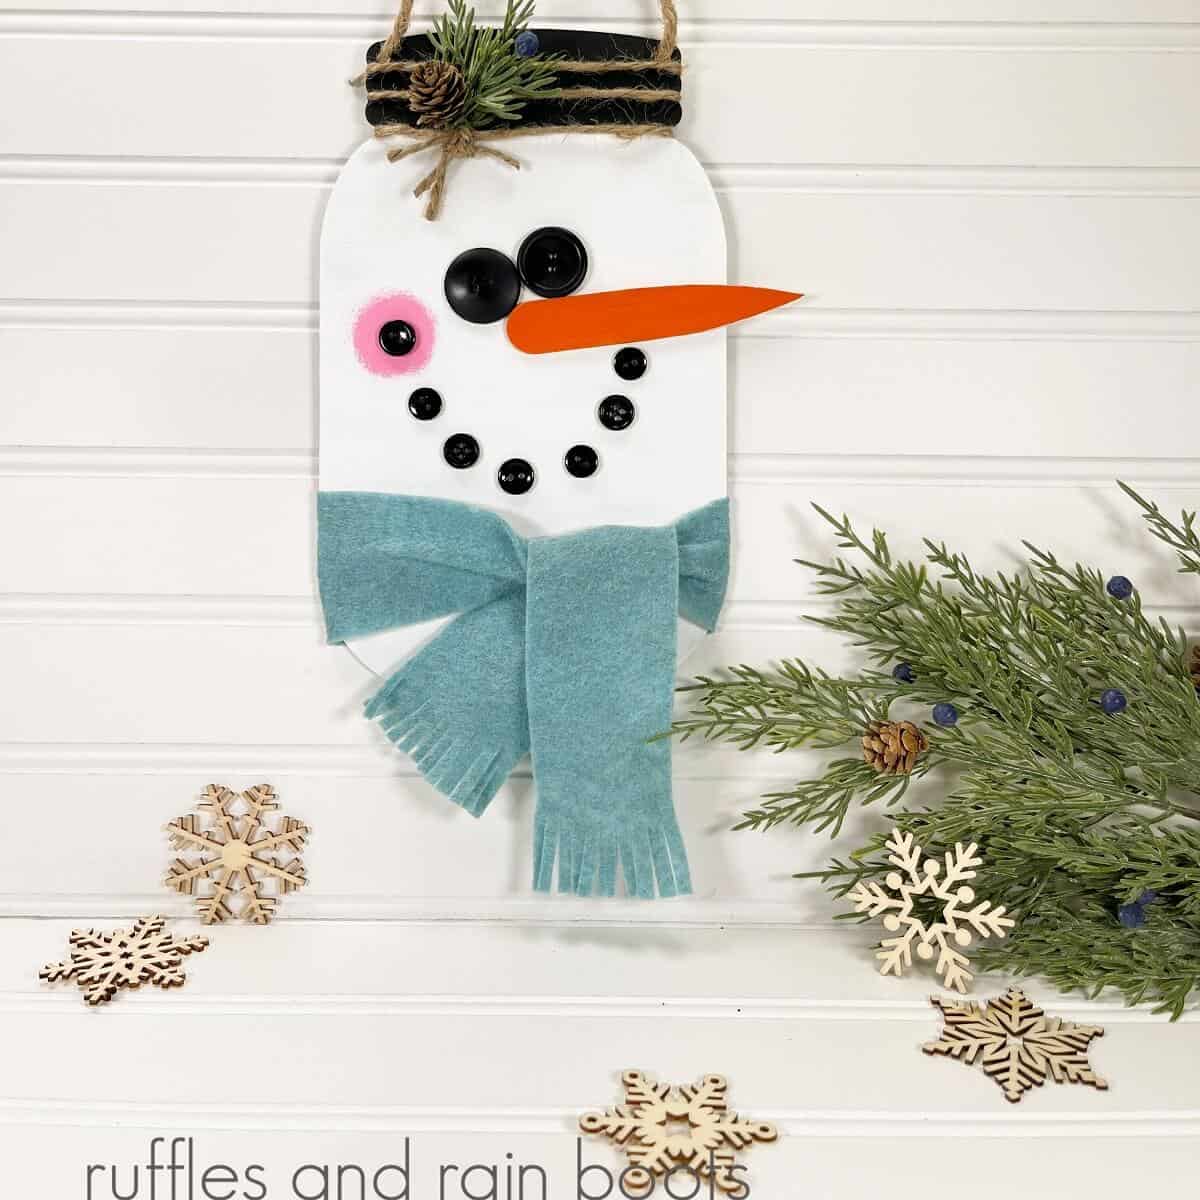 square image of a painted galvanized metal Hanging Mason Jar Snowman next to a piece of faux greenery and 5 wooden snowflakes on a white beadboard background